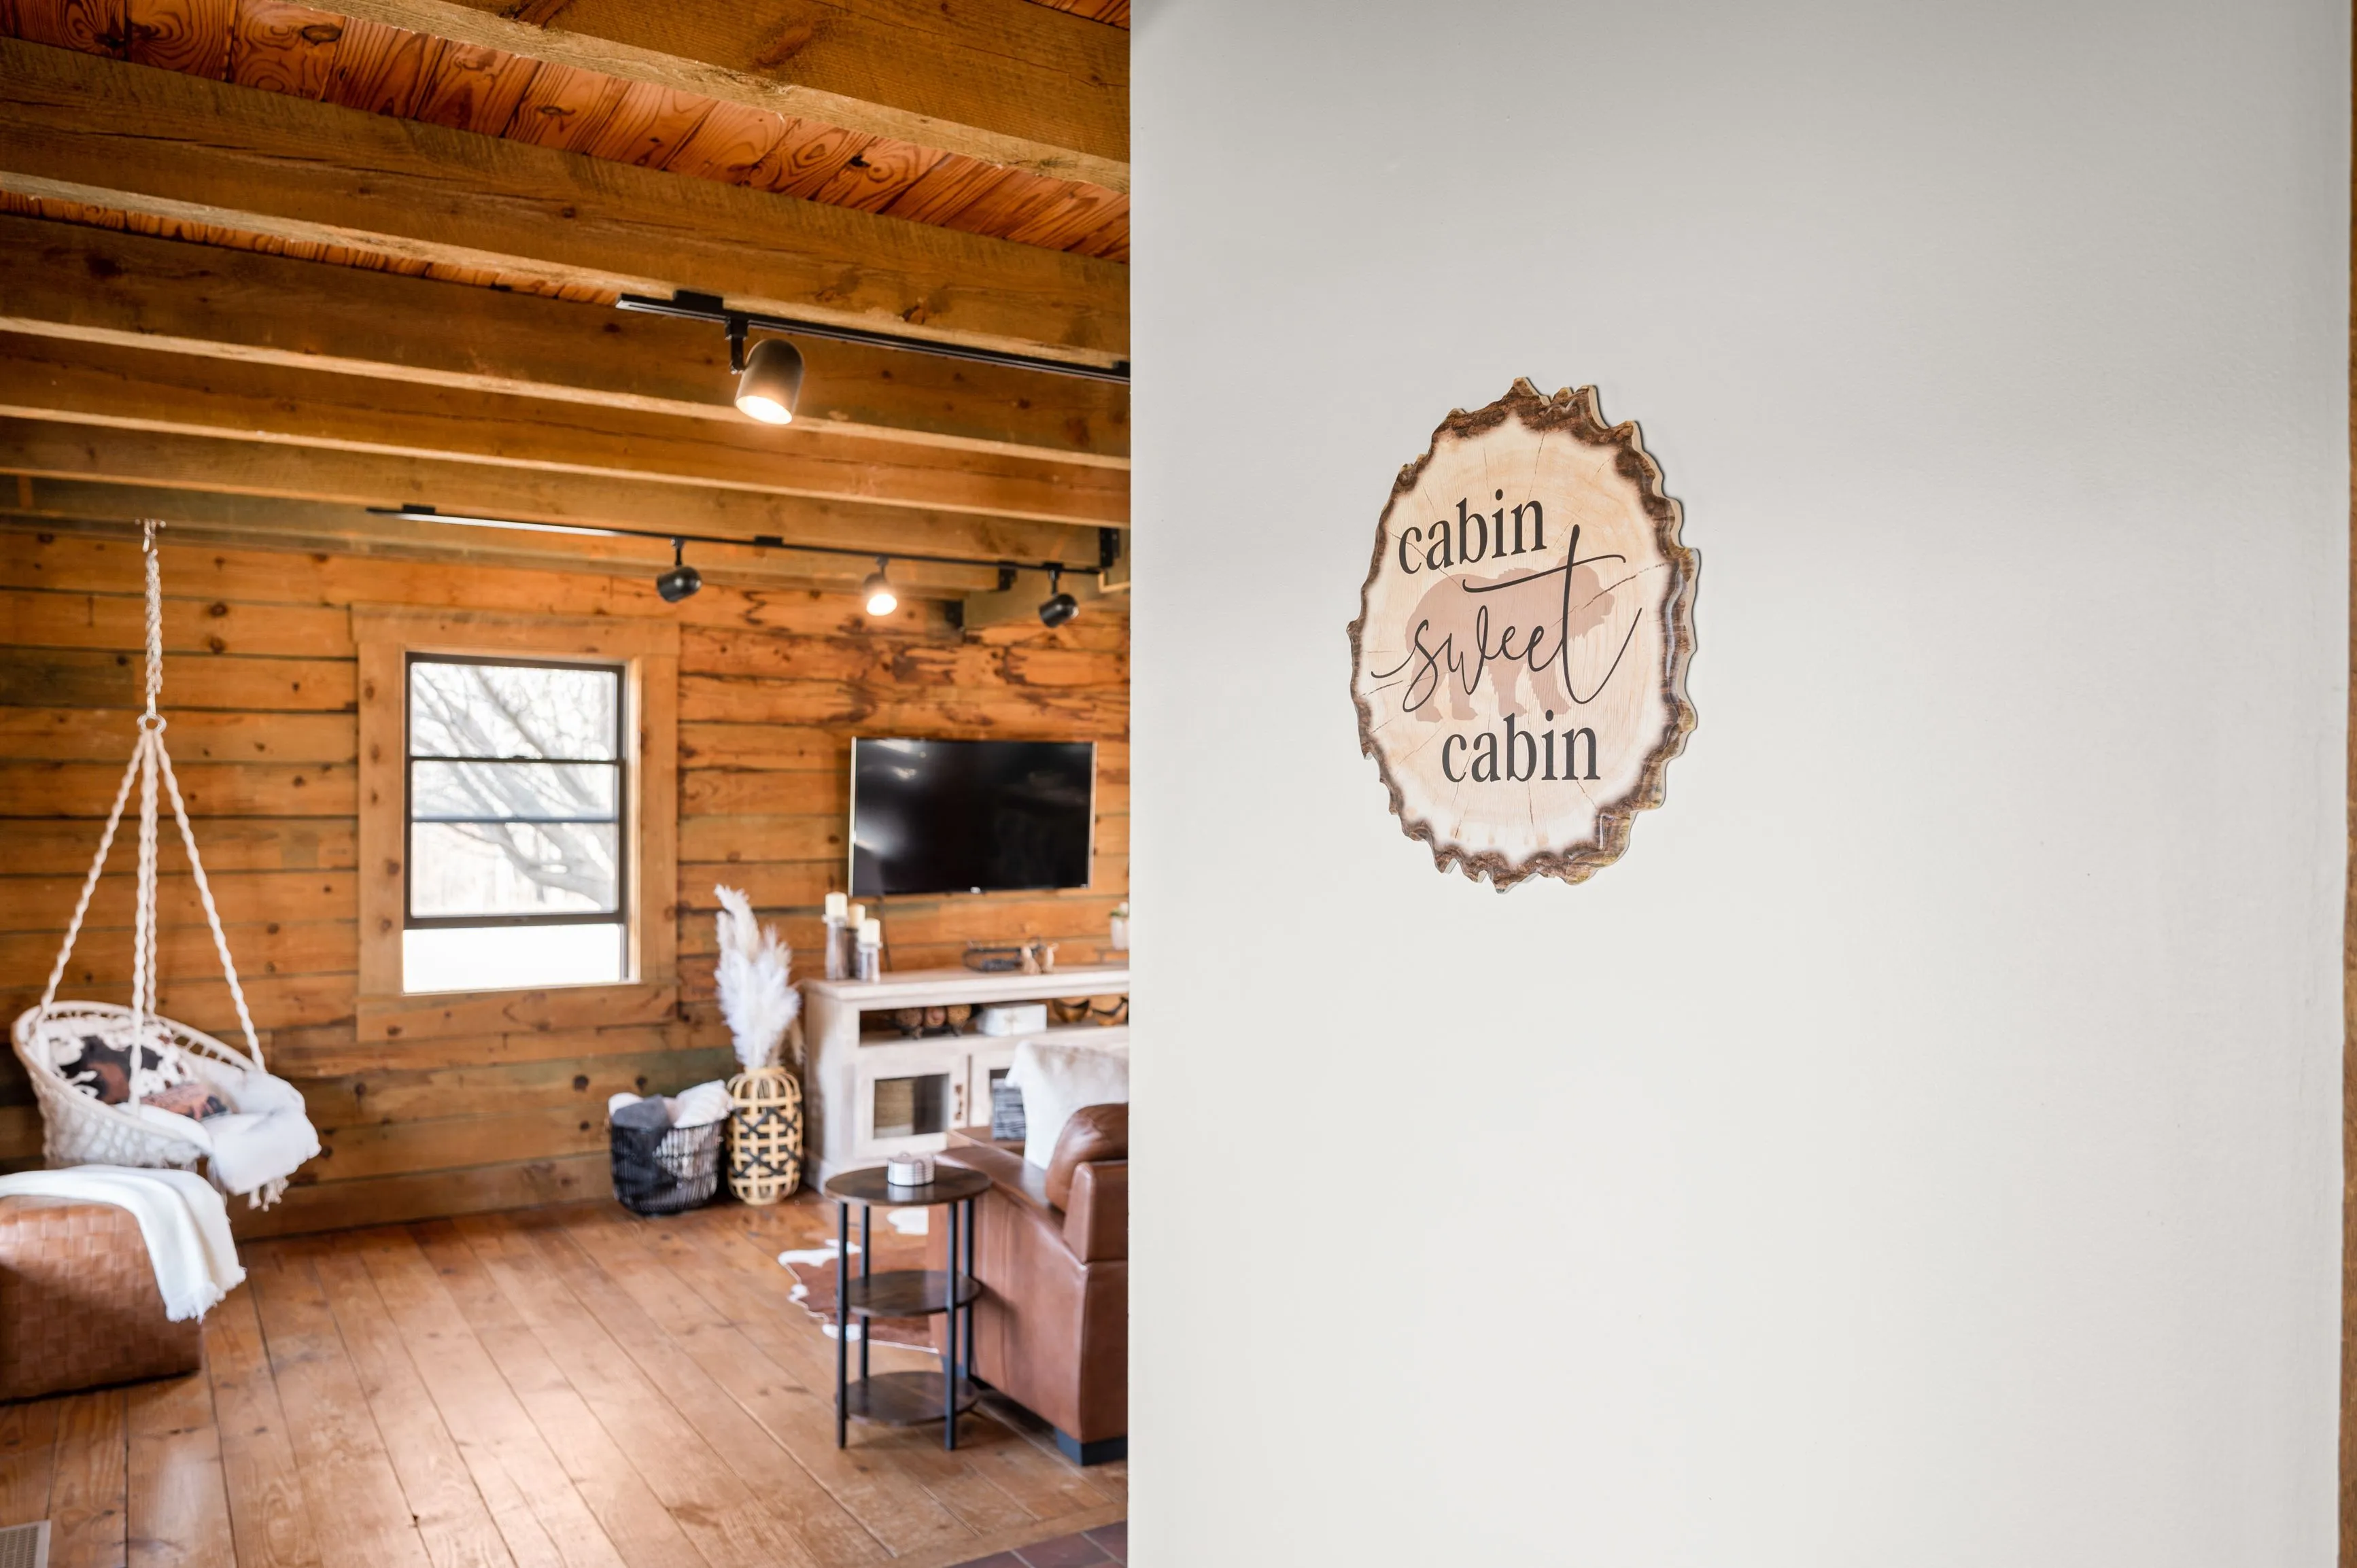 Interior of a rustic cabin living room with wooden walls and floors, featuring a swing chair, leather sofa, and a decorative sign that says "cabin sweet cabin".